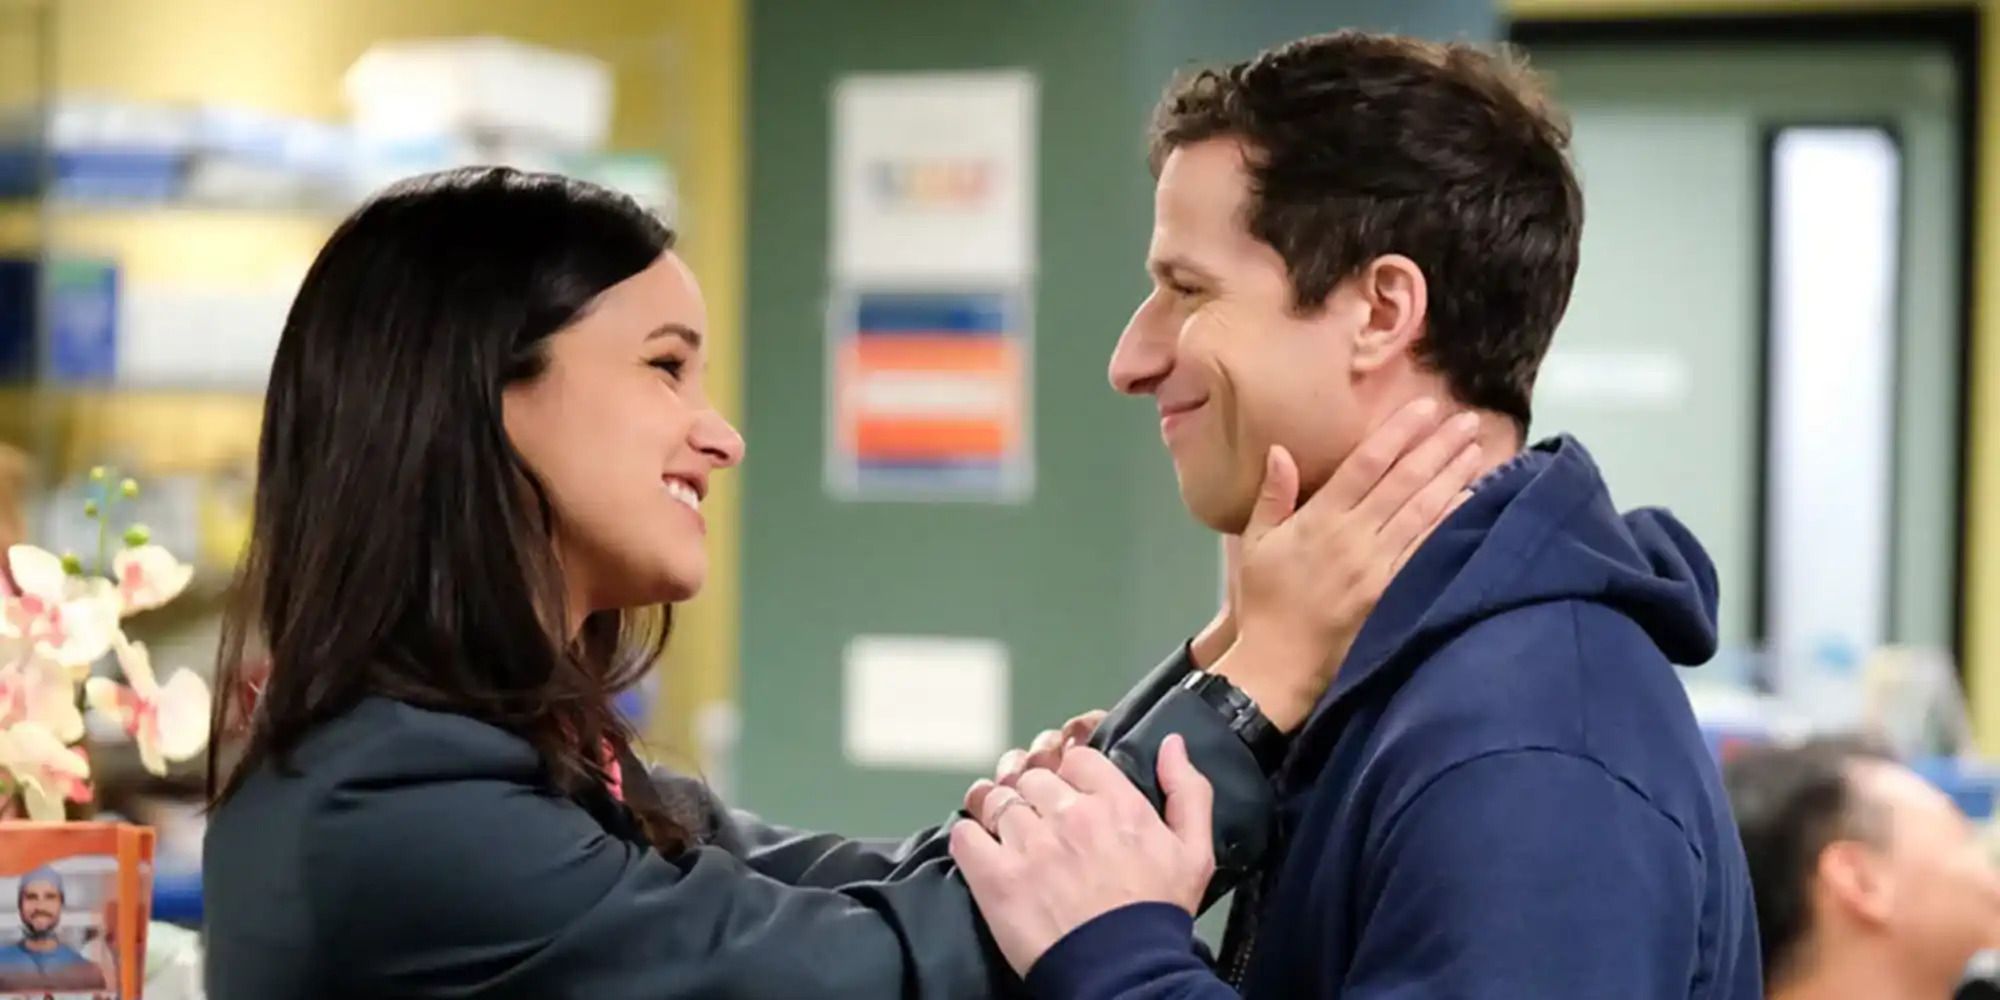 Andy Samberg as Jake and Melissa Fumero as Amy smiling at eachother in Brooklyn 99